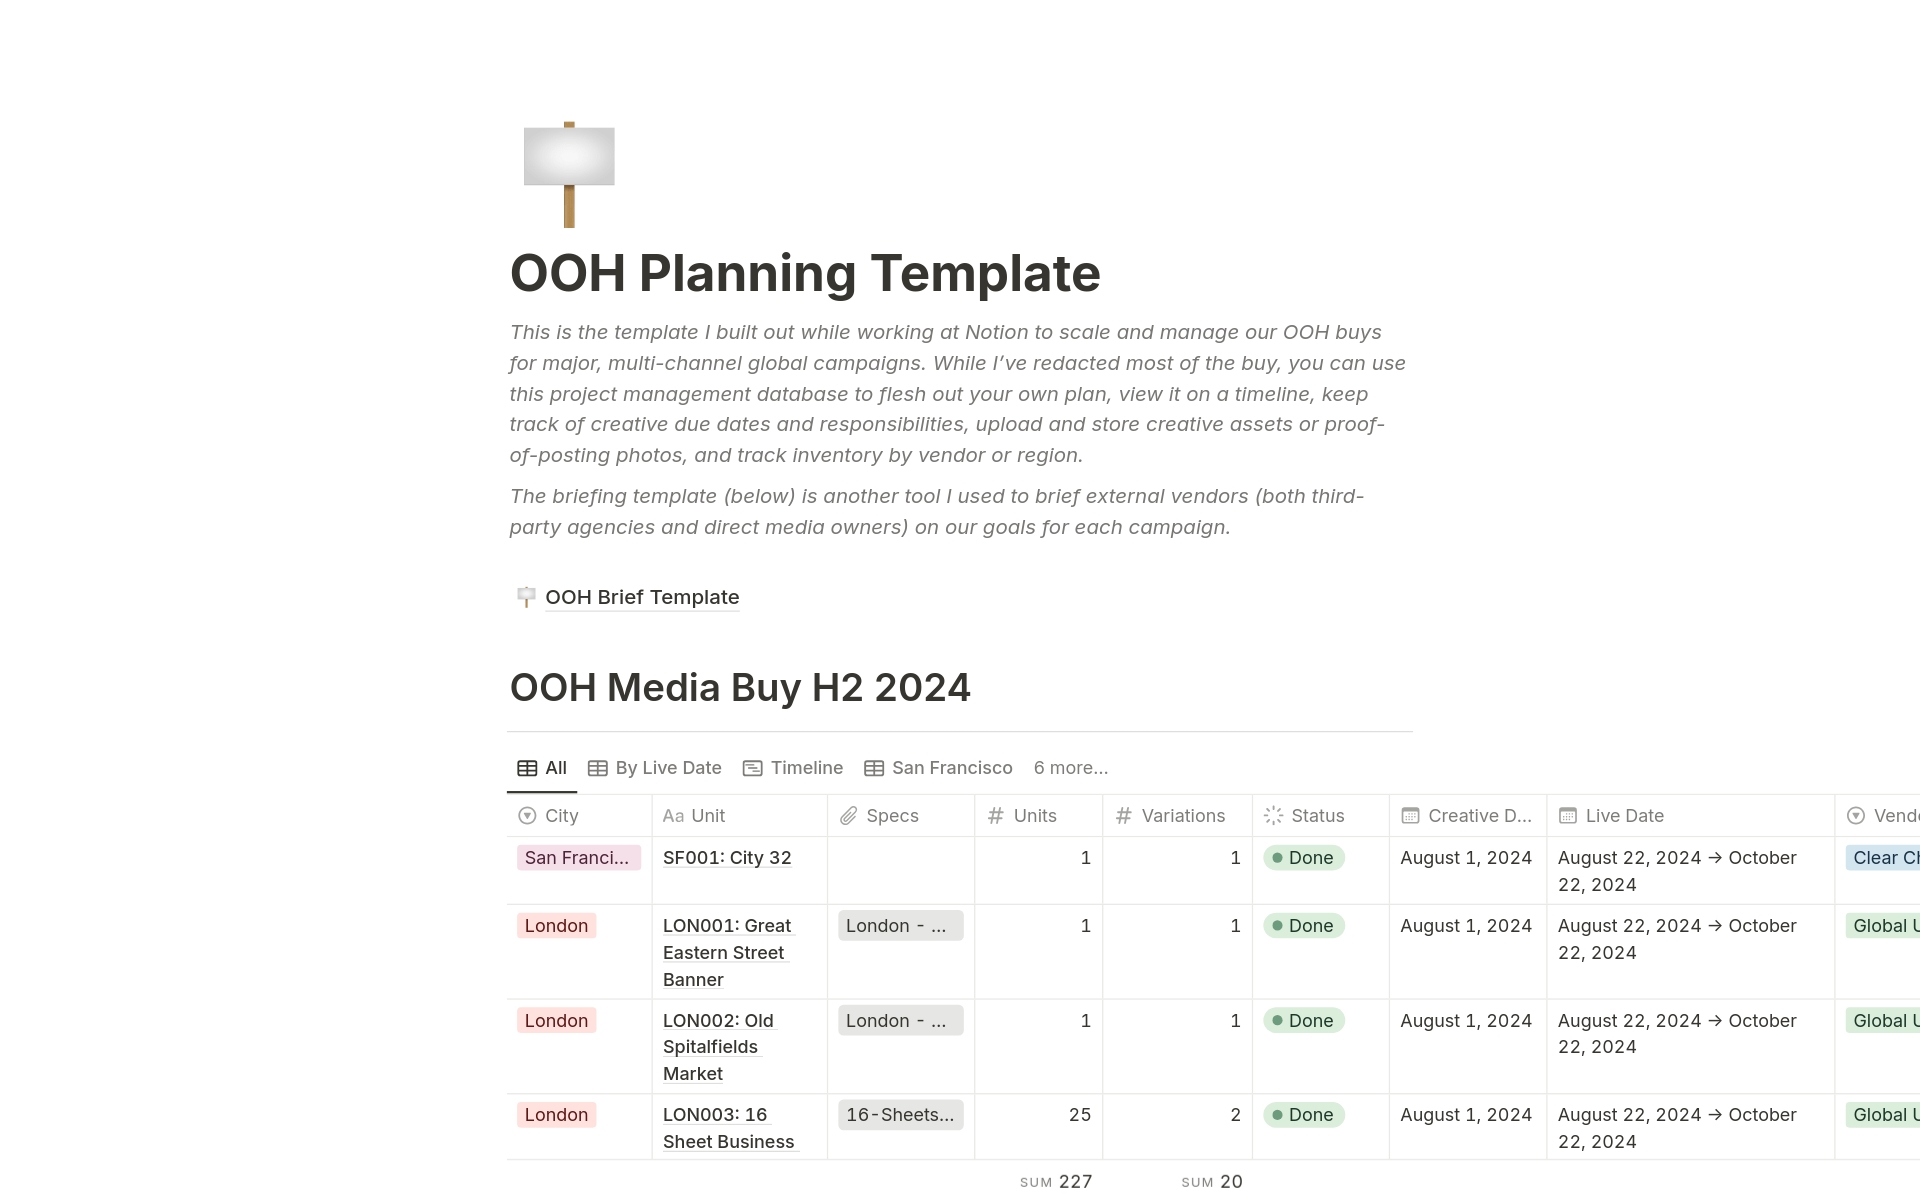 A template preview for Out-of-Home (OOH) Planning